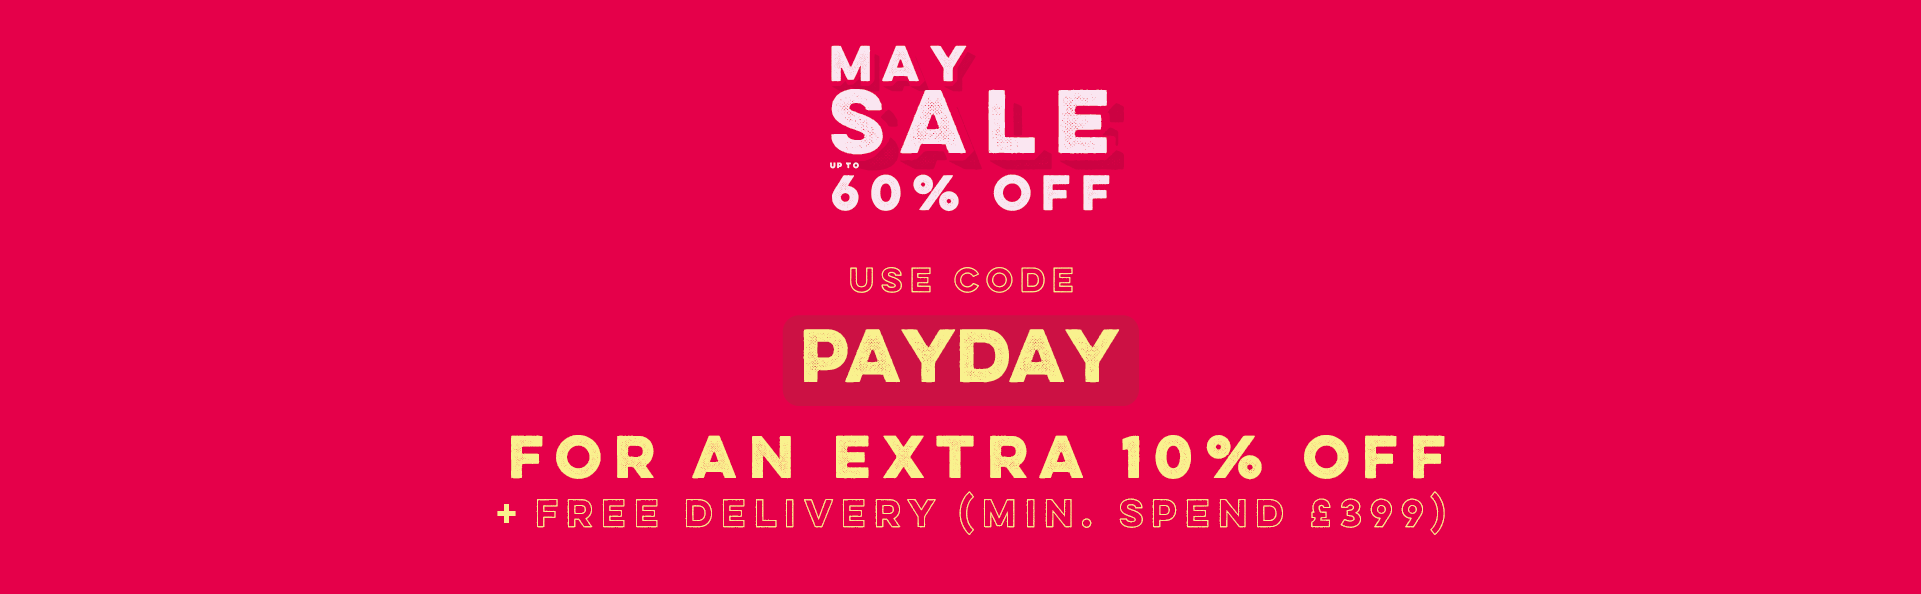 MAY SALE 60% OFF